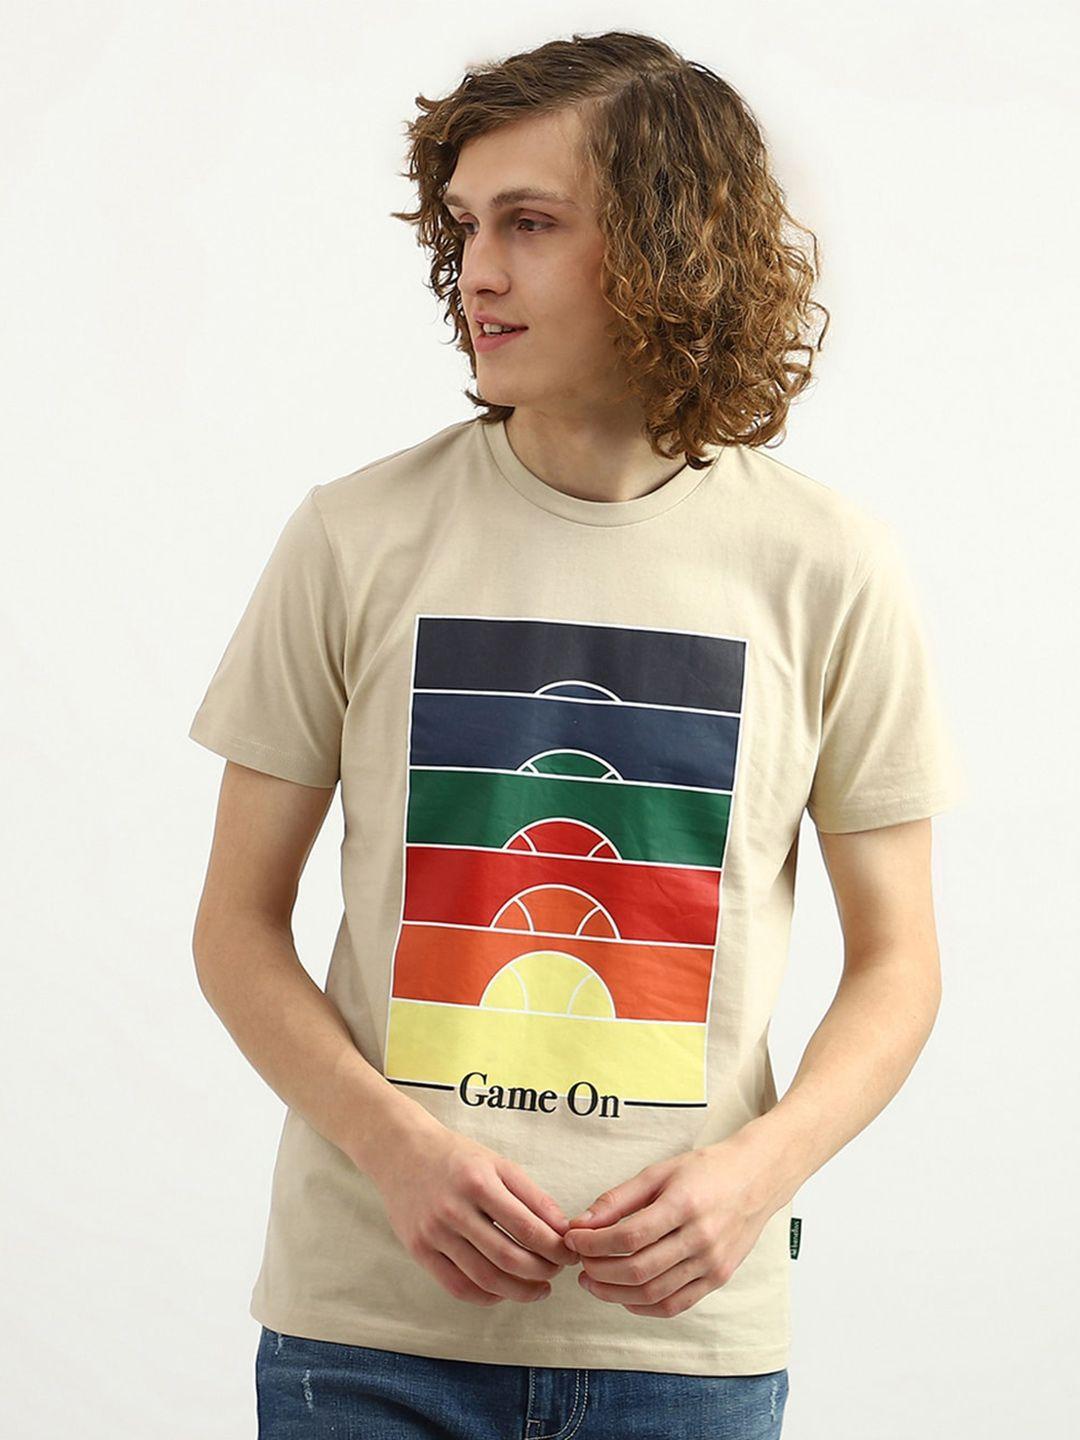 united-colors-of-benetton-men-graphic-printed-cotton-t-shirt